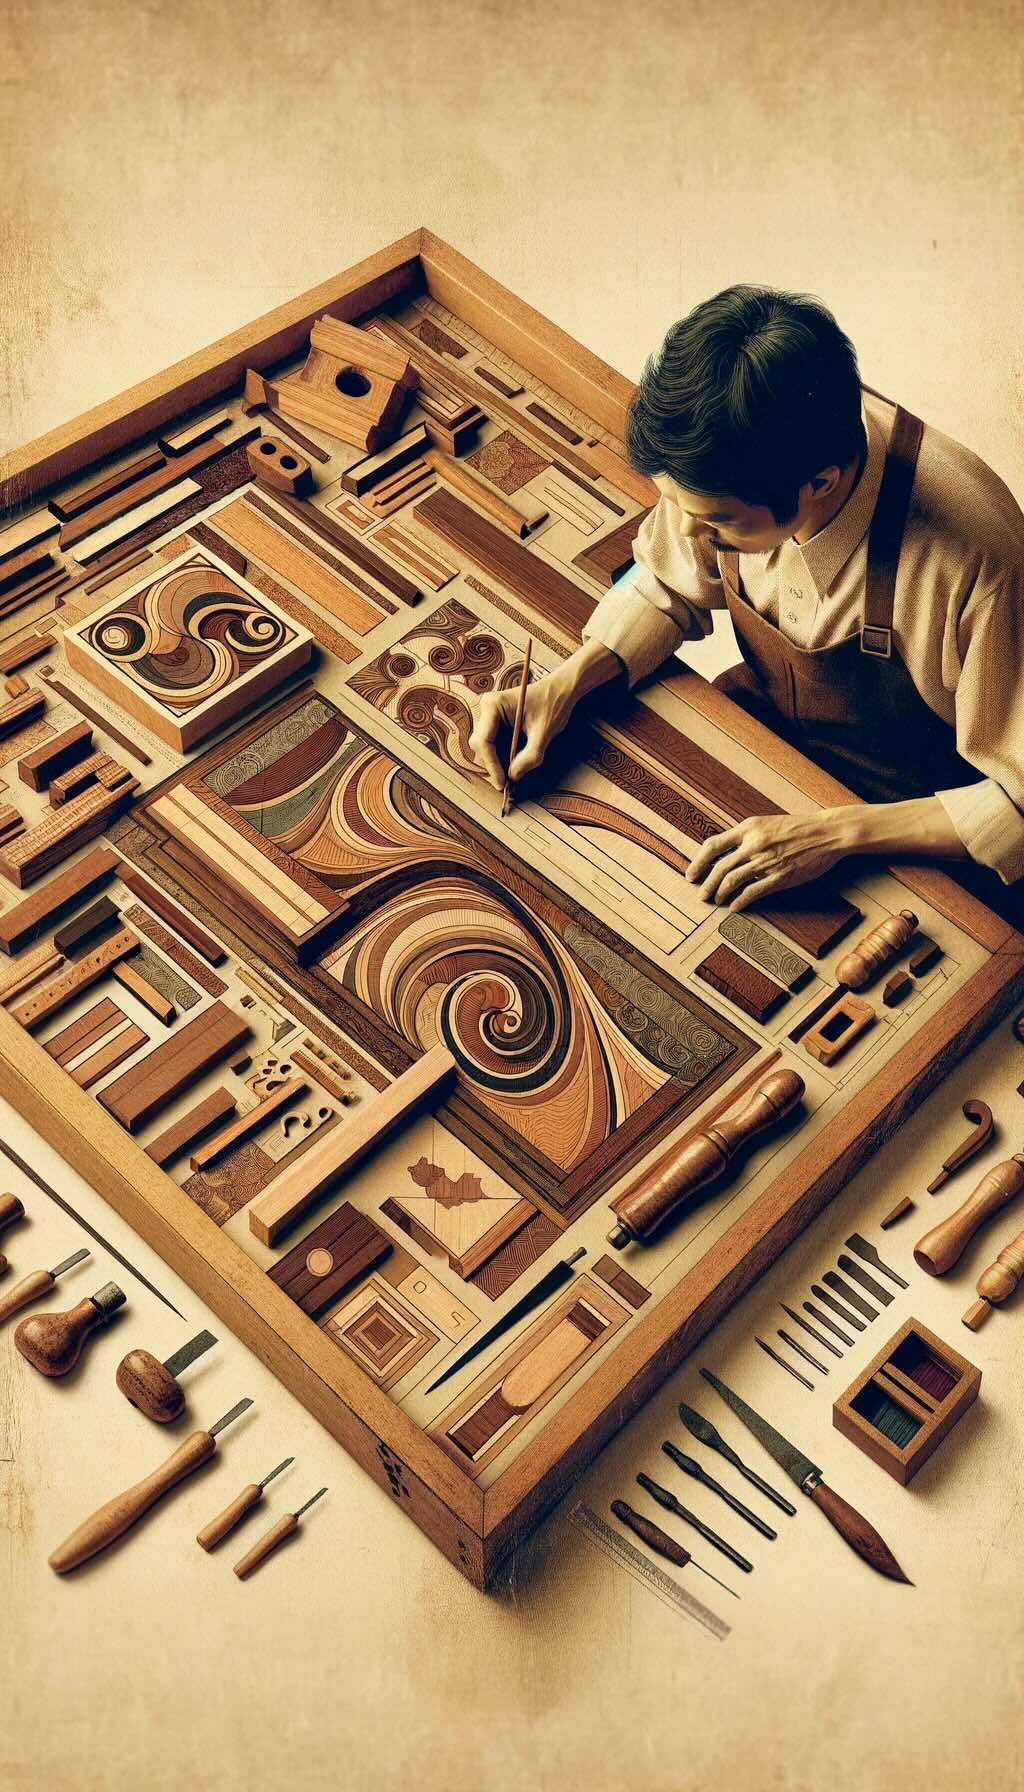 Traditional Japanese art of Yosegi-zaiku woodworking depicts a craftsman meticulously working on Yosegi-zaiku, highlighting the intricate process of creating this unique marquetry. The warm, earthy tones with a faded, nostalgic feel in the artwork capture the essence of this age-old craft and its cultural significance in Japan. 